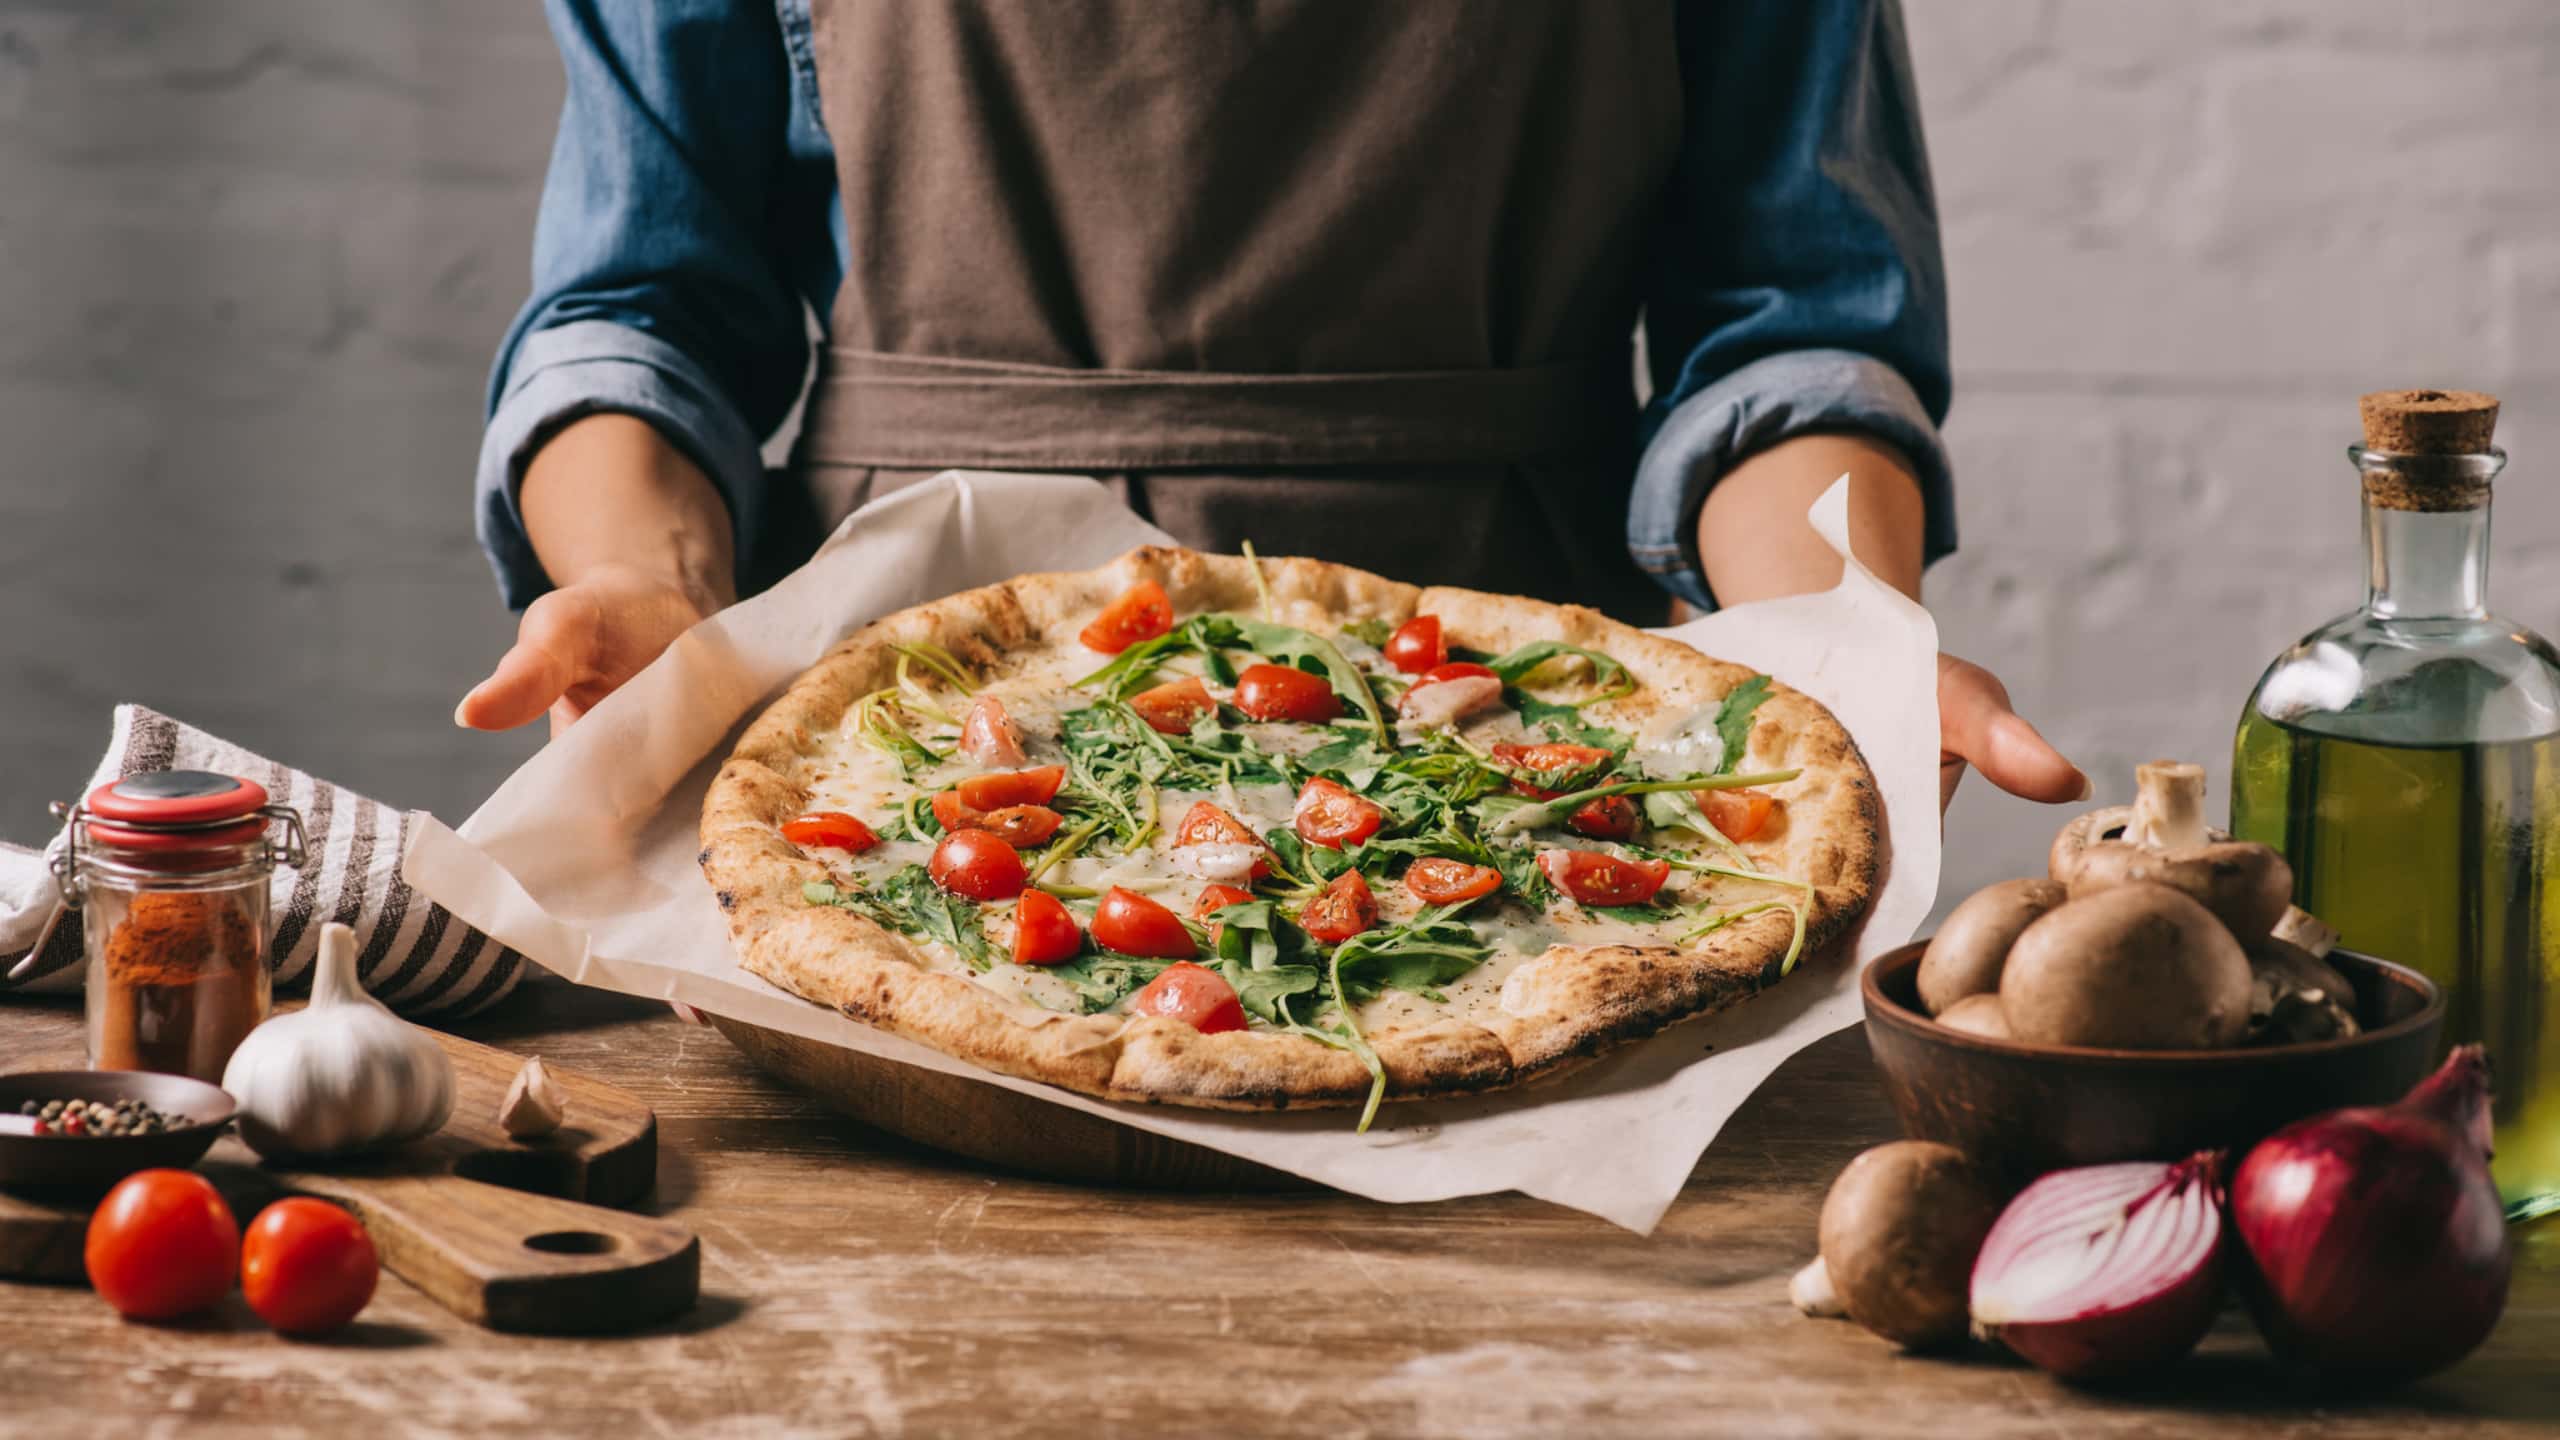 How to Make Healthier Pizzas Without Sacrificing Flavor